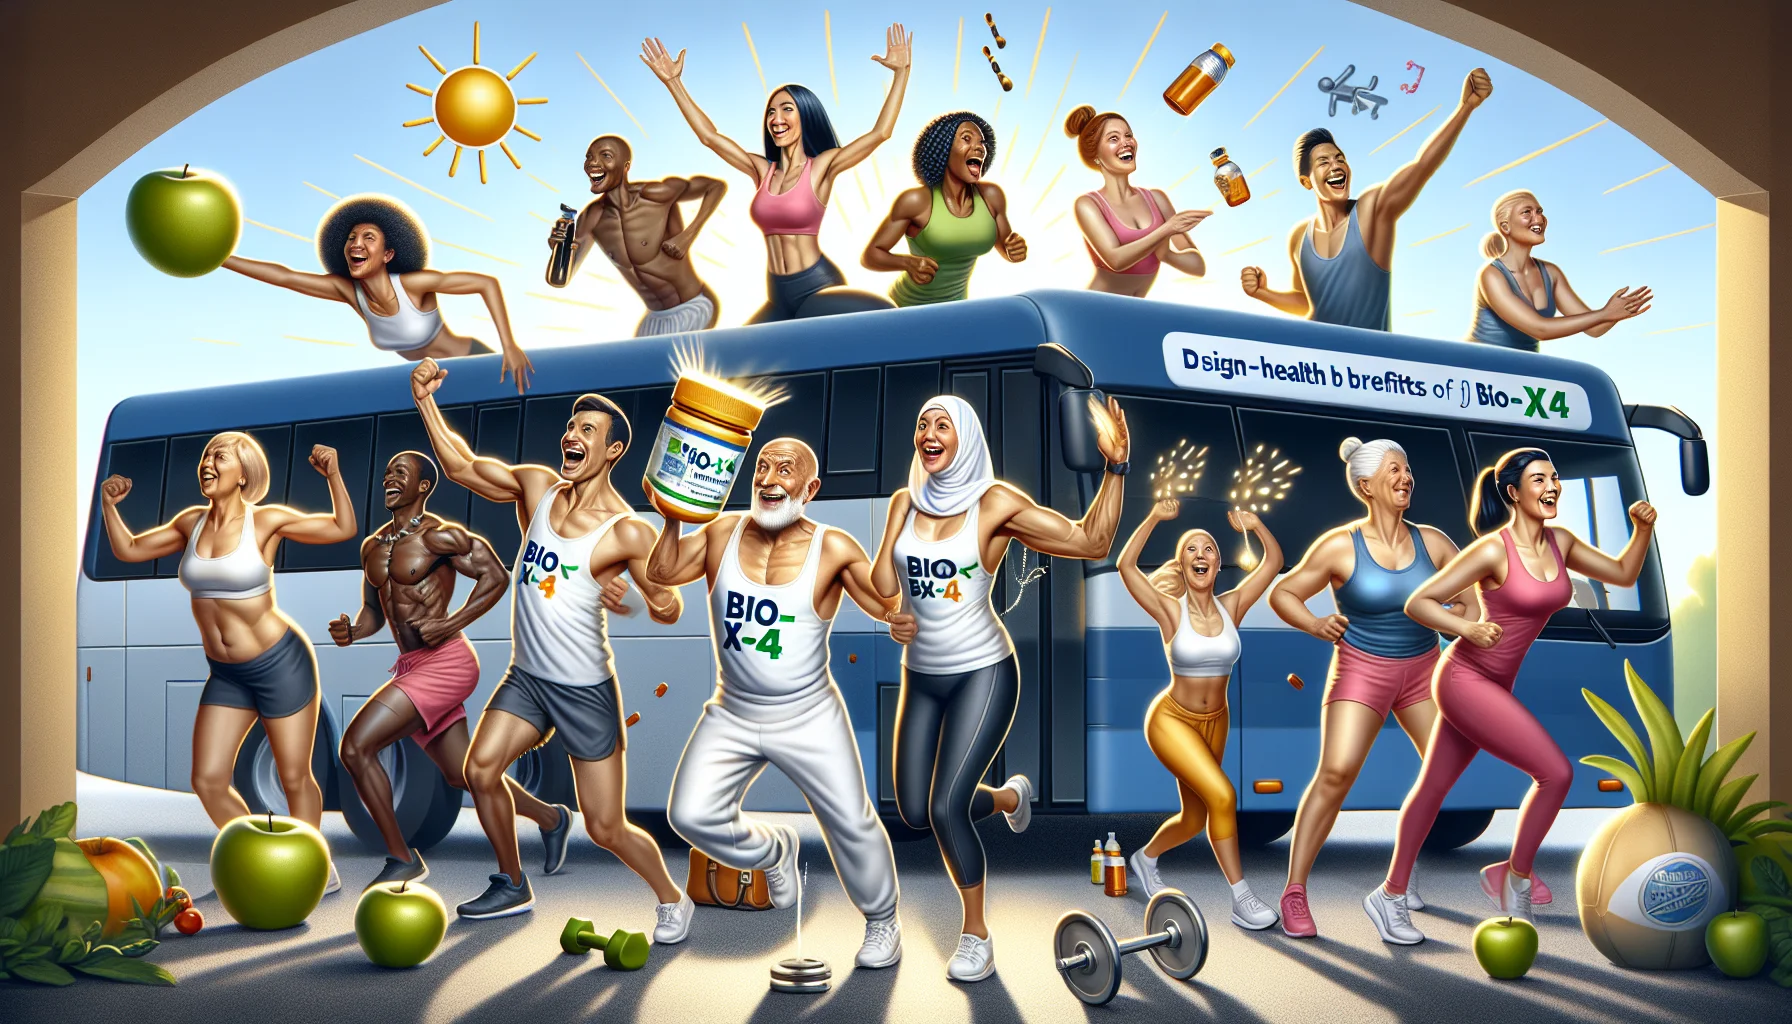 Design a creative and humorous scene promoting the health benefits of an abstract product named Bio-X4. The scene should depict diversified individuals of differing descents such as Caucasian, Hispanic, Black, Middle-Eastern, South Asian, and White engaging in various forms of exercise like yoga, jogging, weight lifting and skipping. Their expressions should evoke enthusiasm and leisure, encouraging viewers to join them in their active lifestyle. Vignettes of radiating health such as glowing skin, toned muscles, and vibrant energy should be prevalent within the scene. The Bio-X4 should be subtly incorporated as an element within the scene, perhaps as the logo on their training gear or as the banner on a bus passing by.